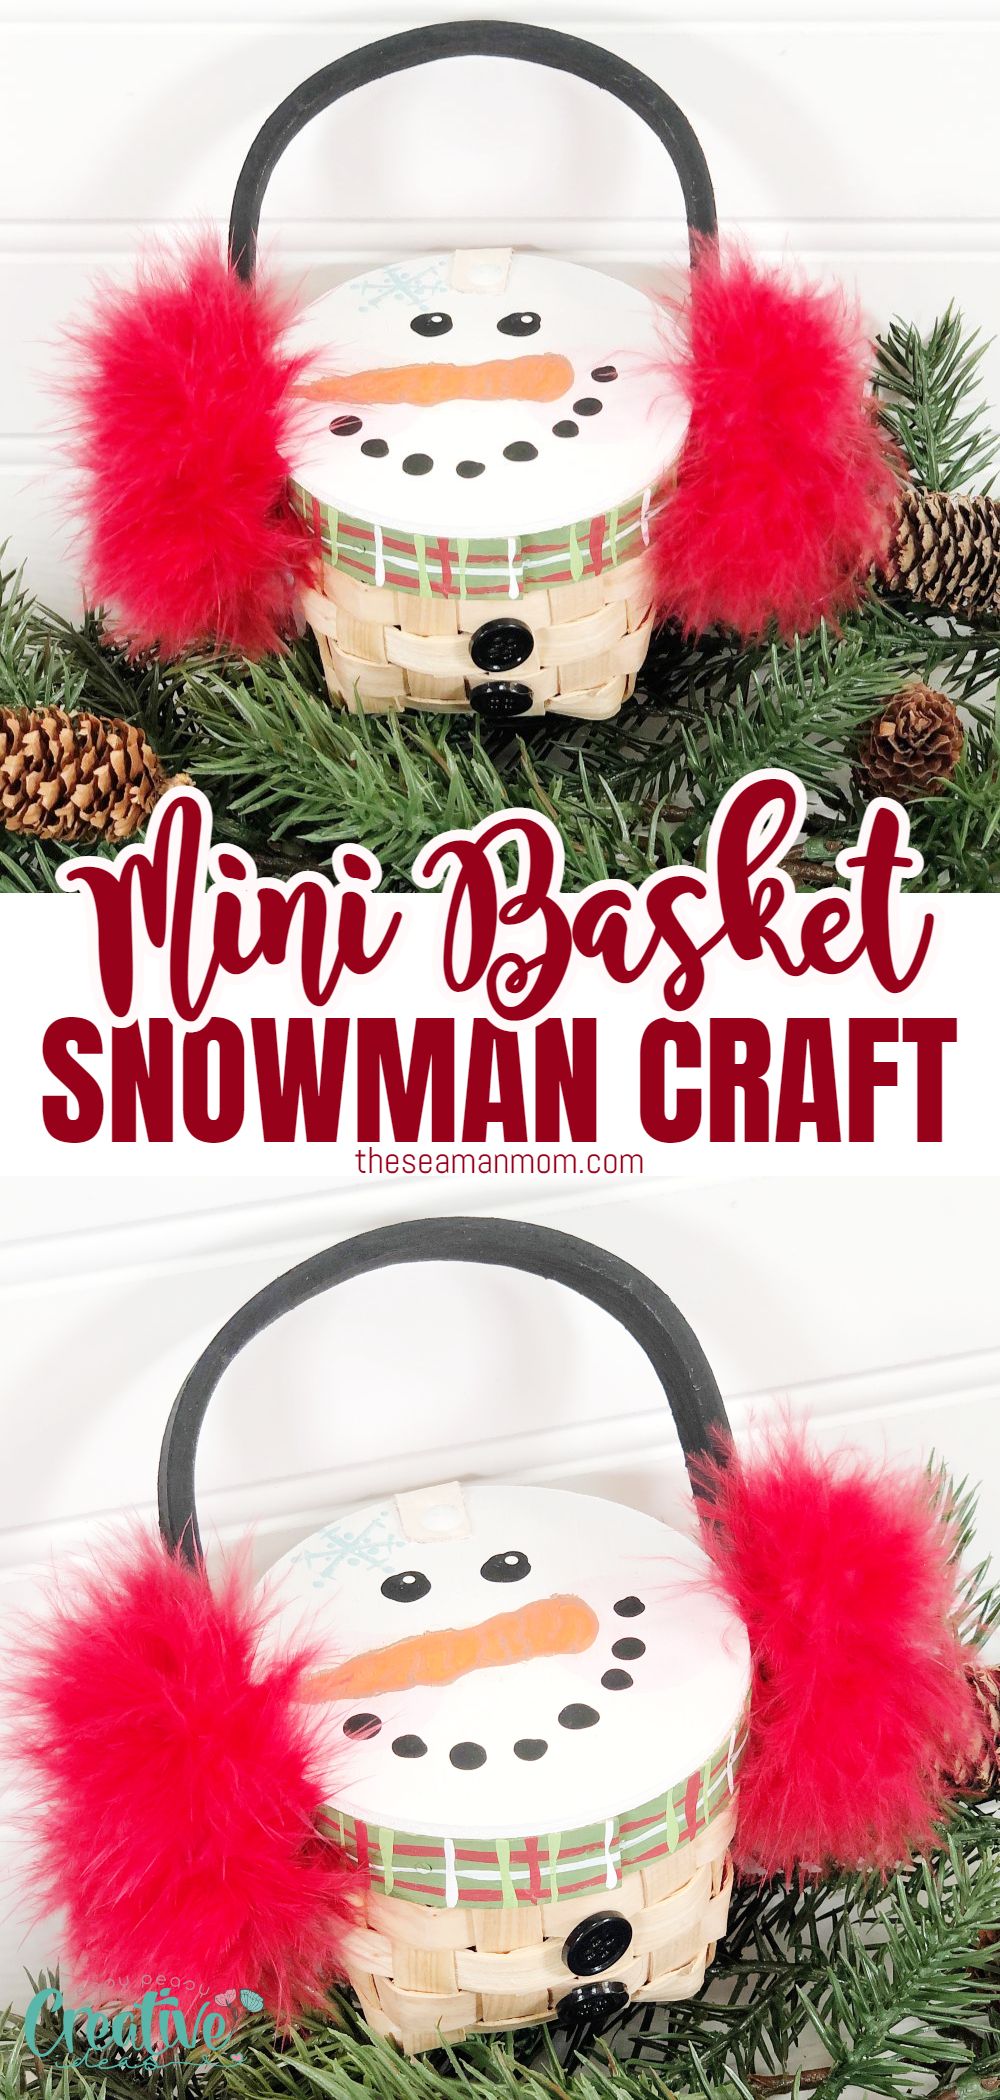 Want to make a memorable winter craft with the kids? Build a snowman craft! Not only is it fun, but it's easy too. This DIY snowman project is perfect for both young and old, and is a great way to get into the festive spirit. via @petroneagu